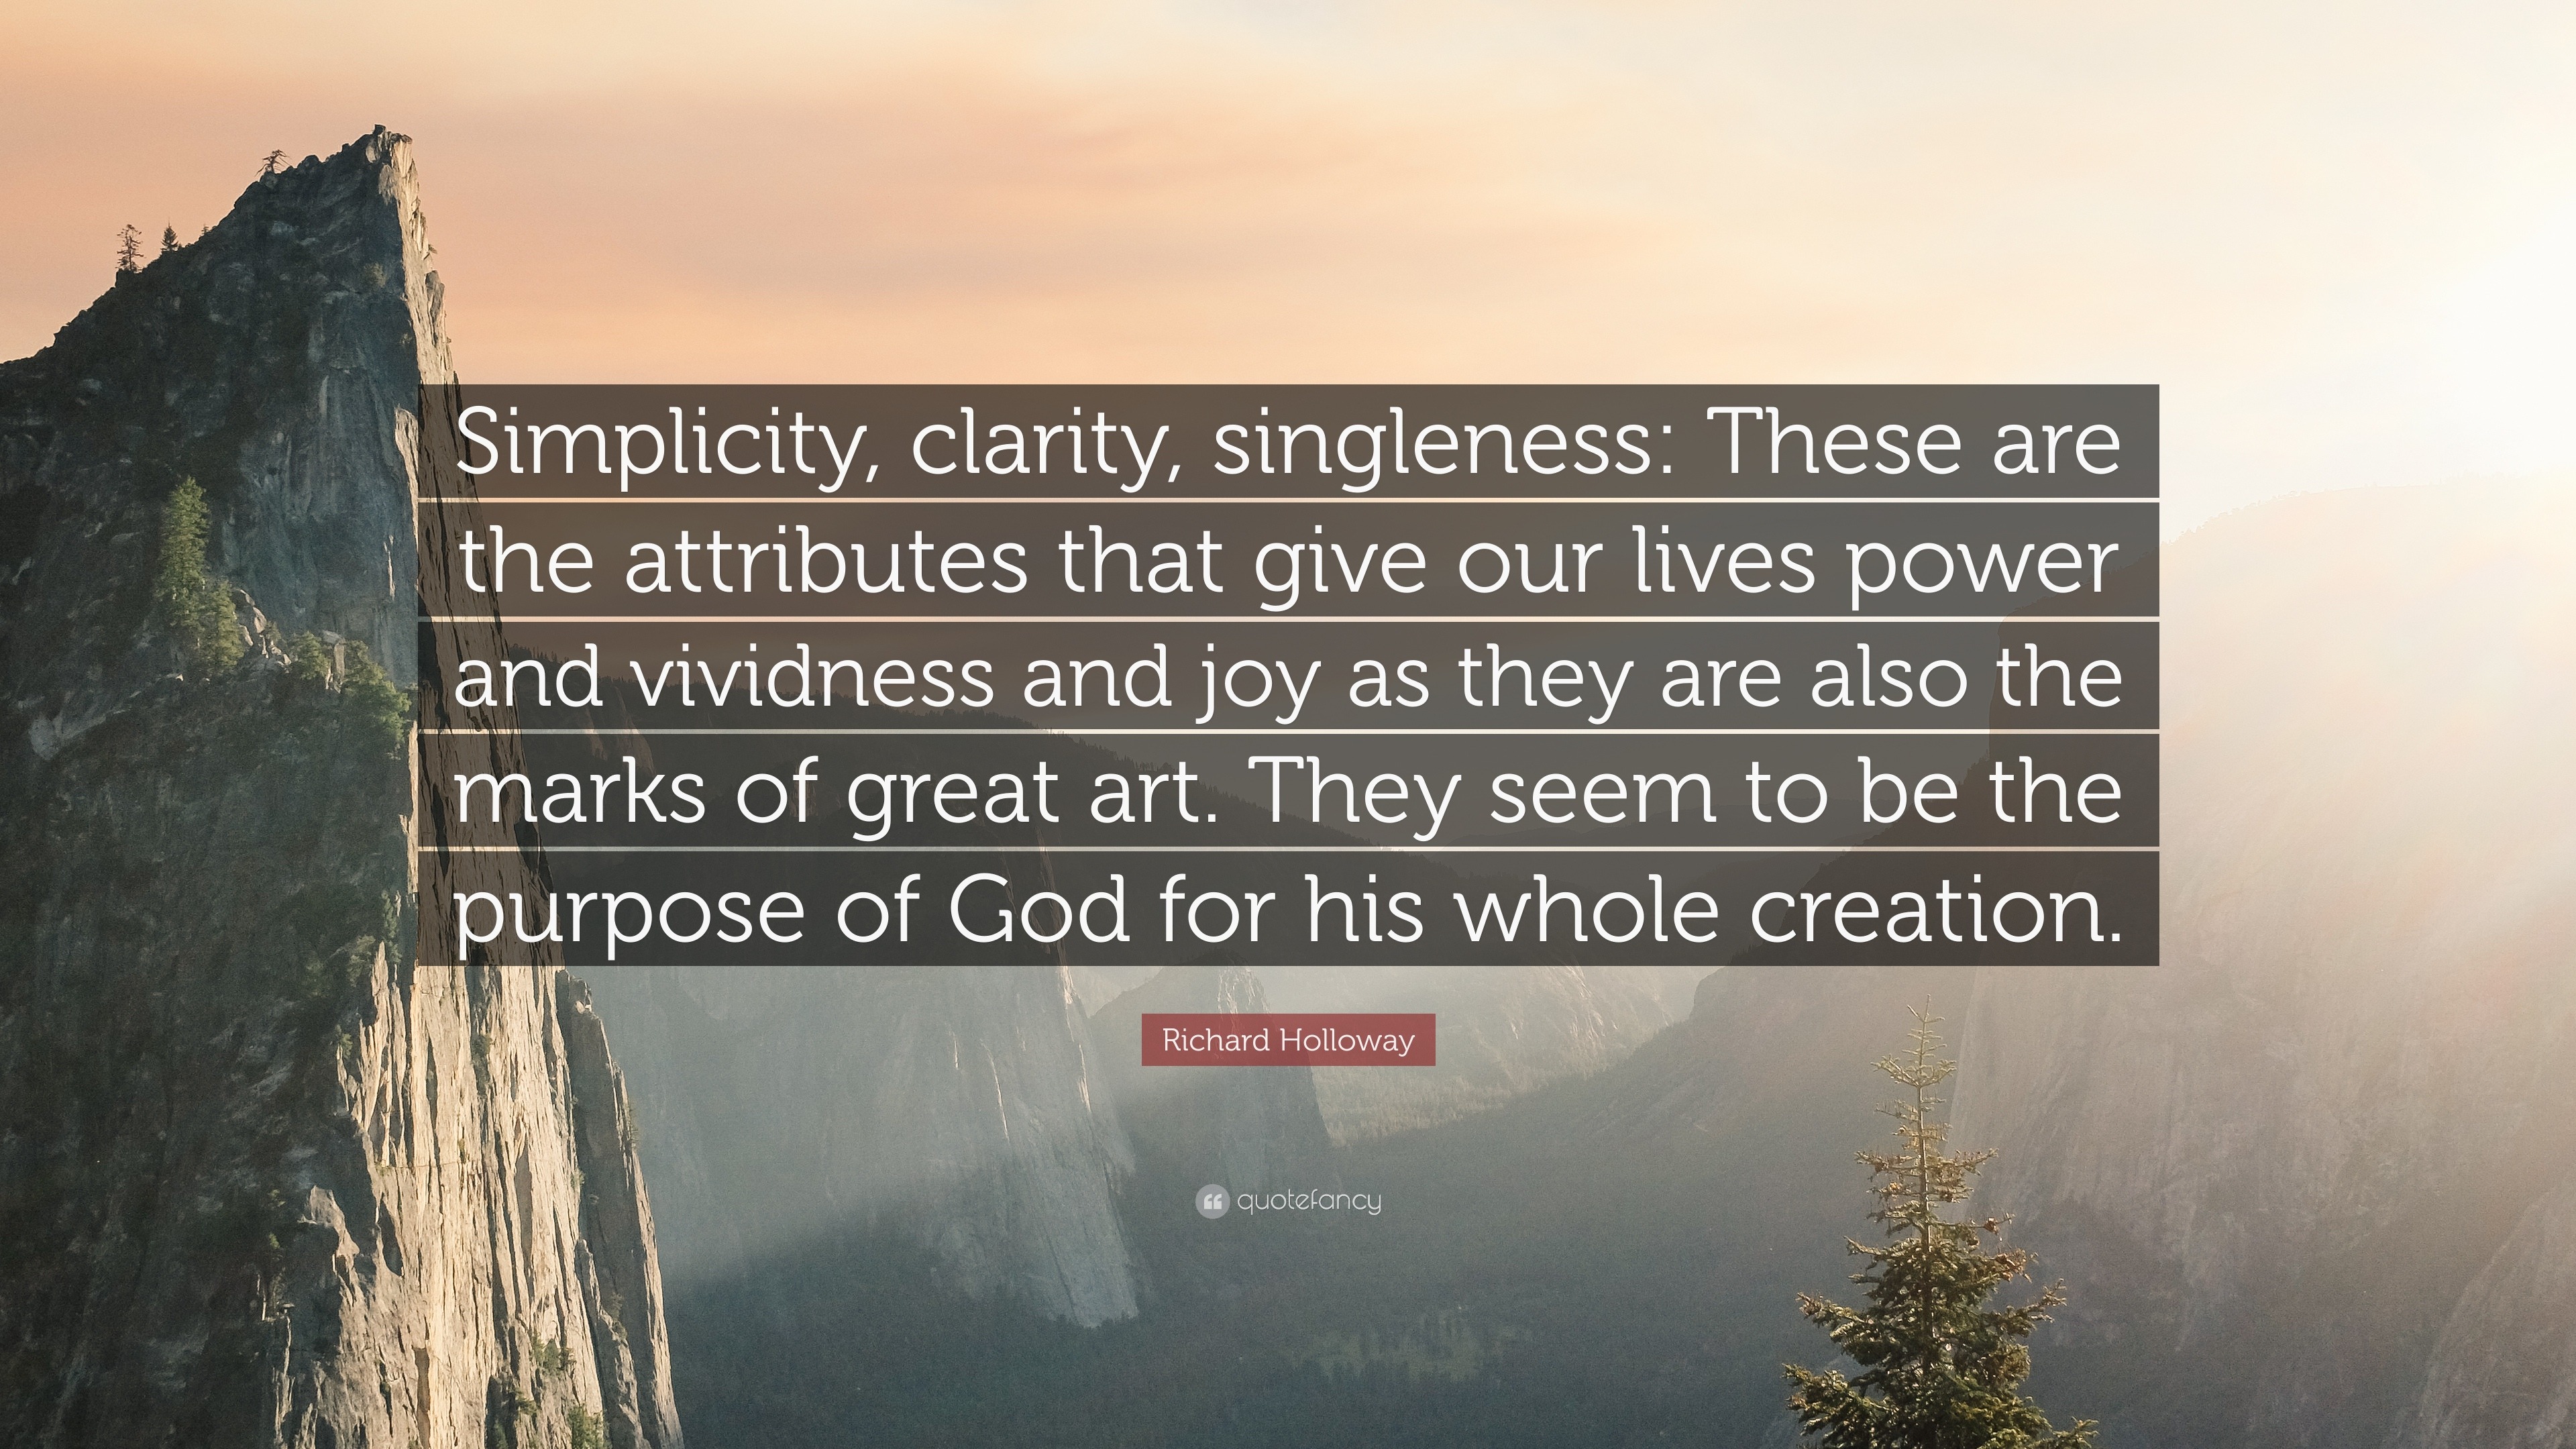 Richard Holloway Quote: “Simplicity, clarity, singleness: These